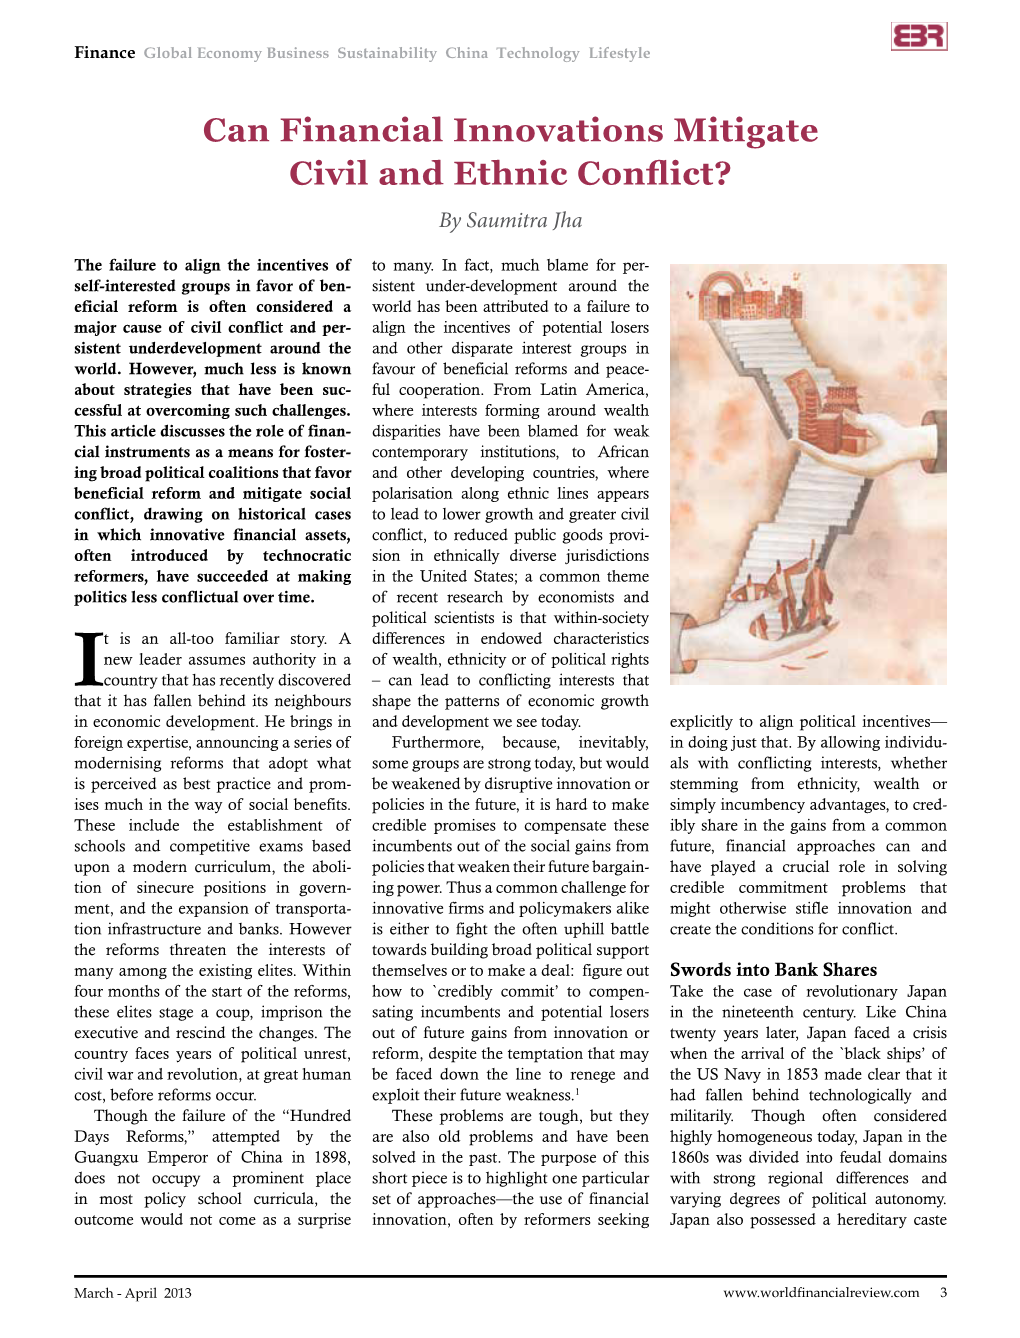 Can Financial Innovations Mitigate Civil and Ethnic Conflict? by Saumitra Jha